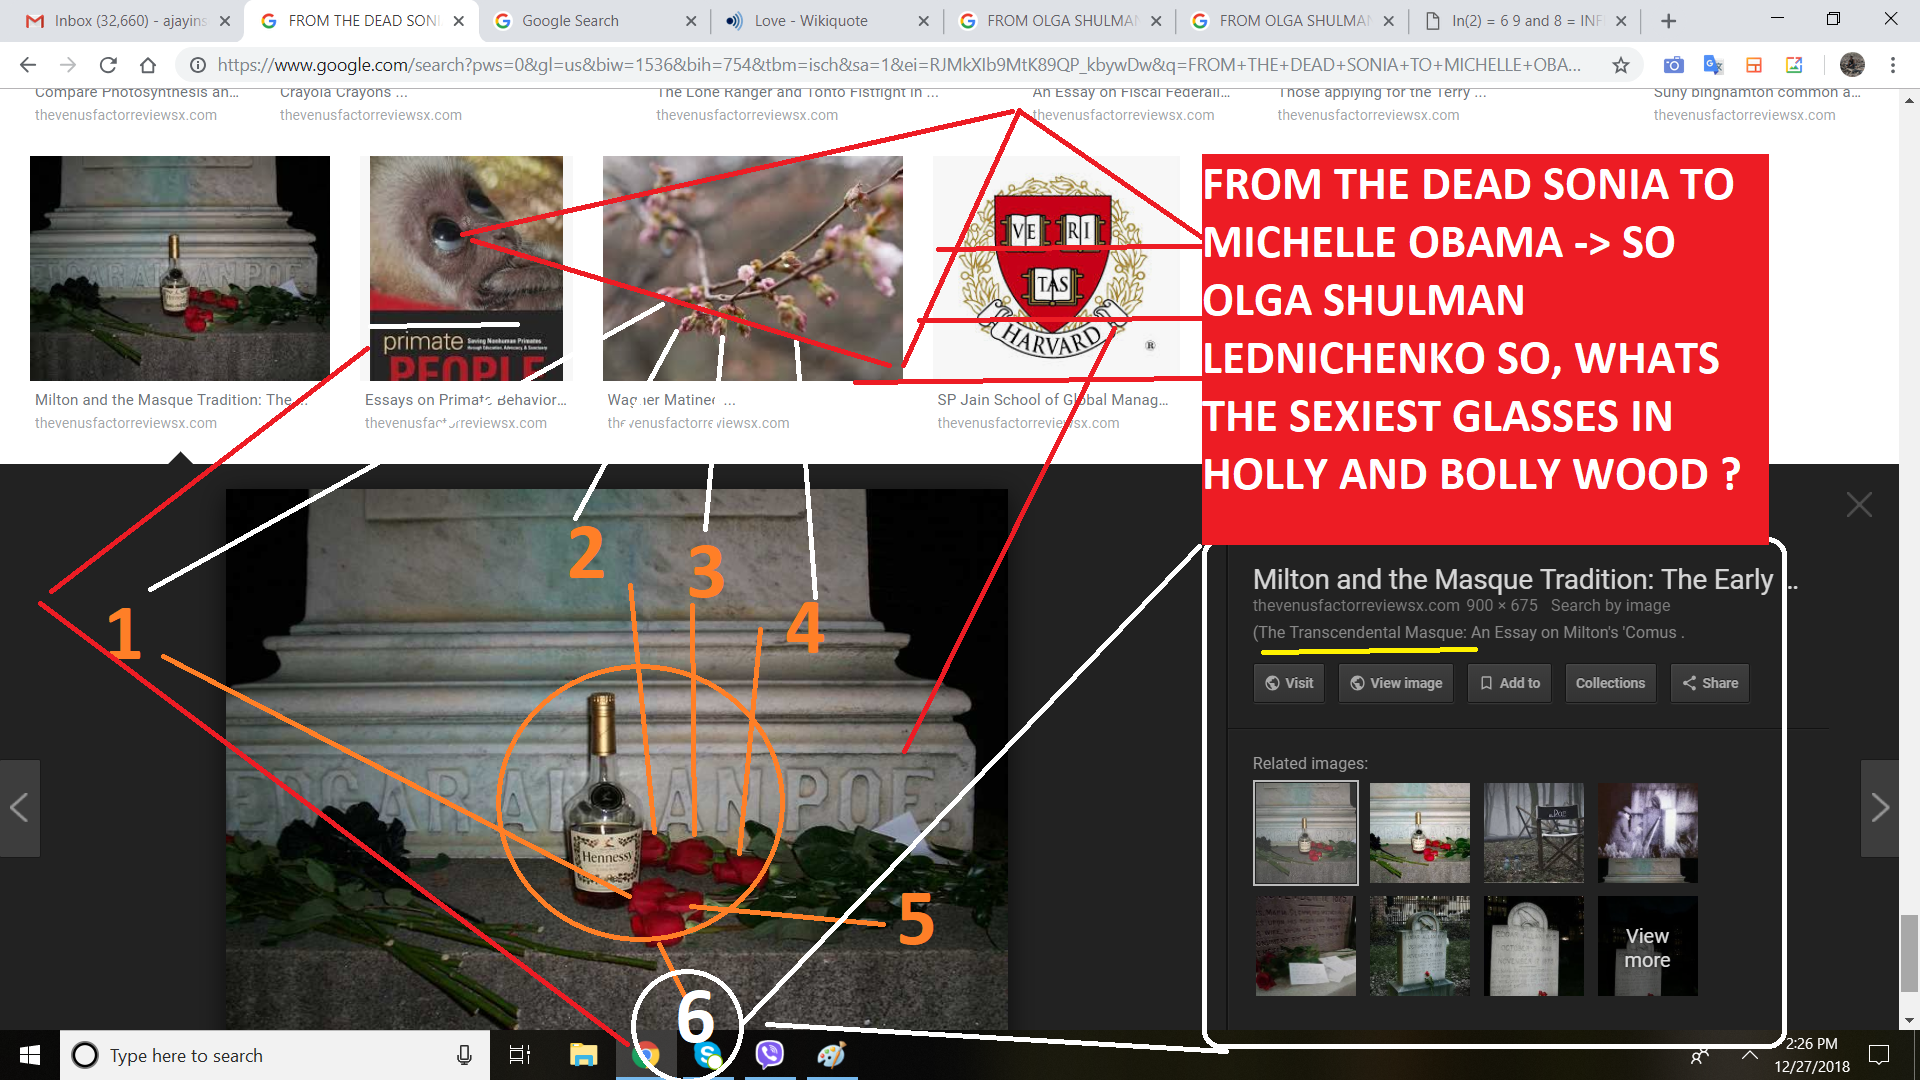 FROM THE DEAD SONIA TO MICHELLE OBAMA SO OLGA SHULMAN LEDNICHENKO SO, WHATS THE SEIXT GLASSES IN HOLLY AND BOLLY WOOD